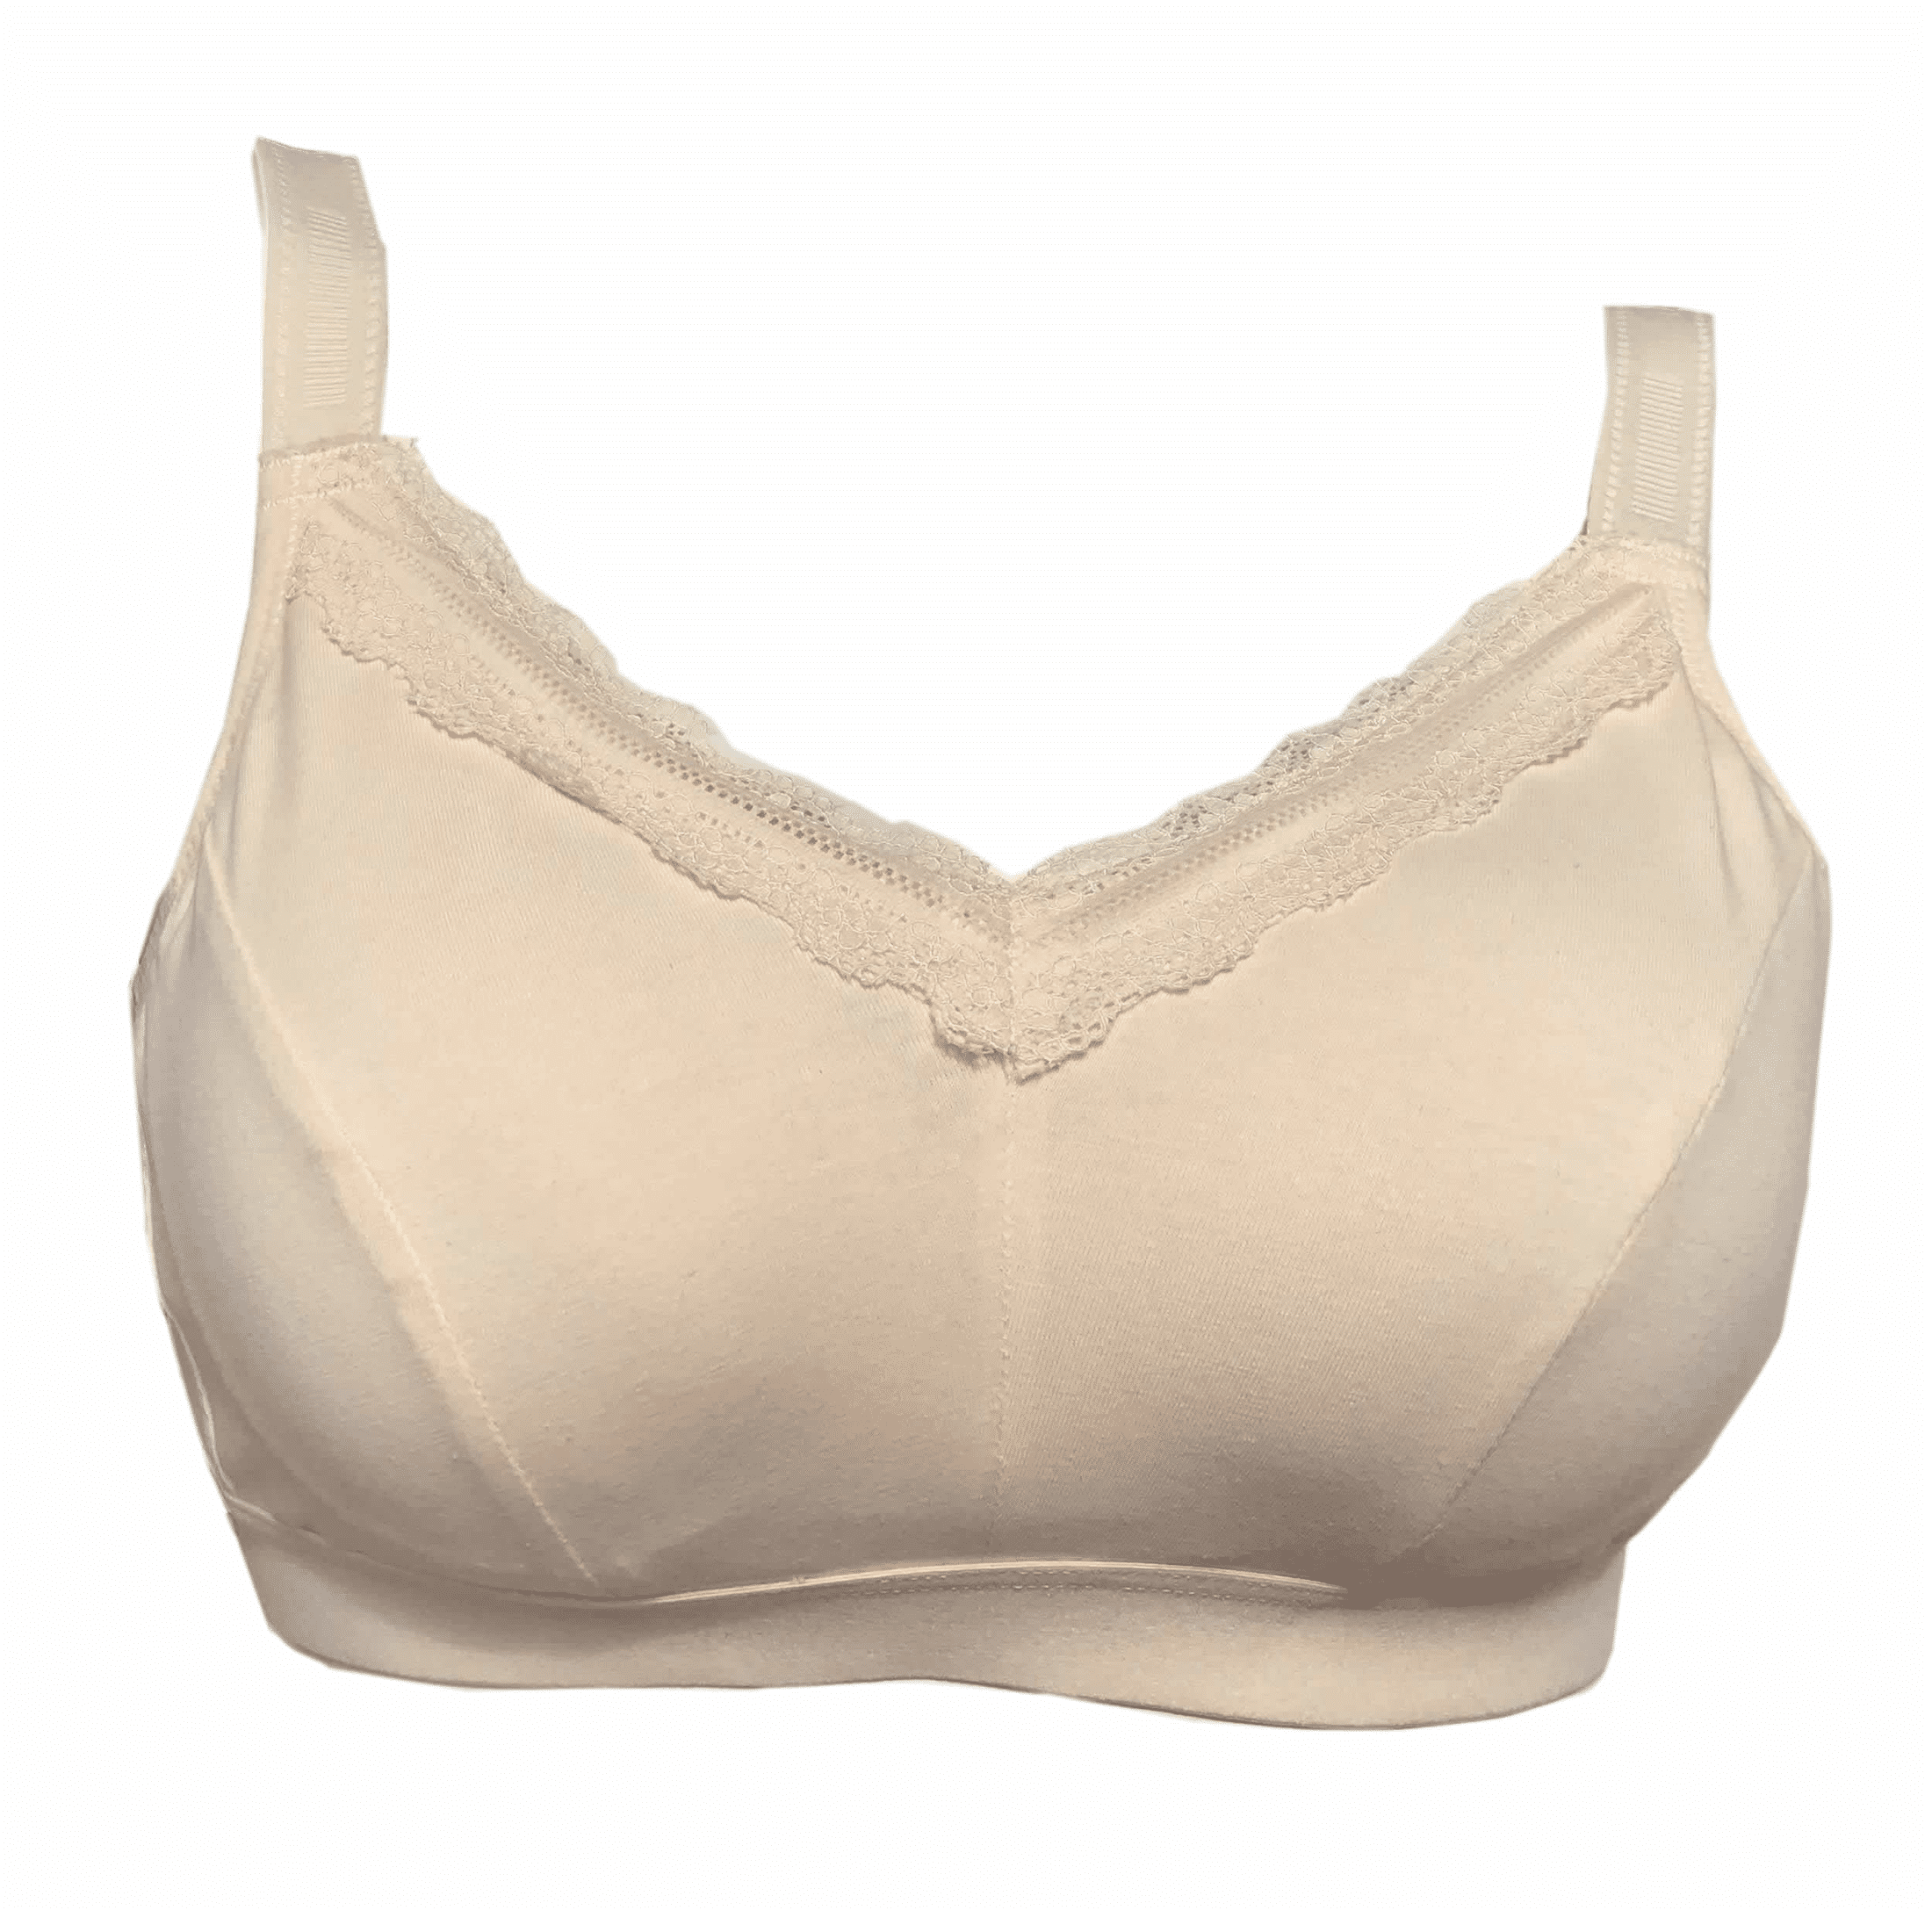 BIMEI Mastectomy Bra with Pockets for Breast Prosthesis Women's Full  Coverage Wirefree Everyday Bra plus size 8102,Pink,34C